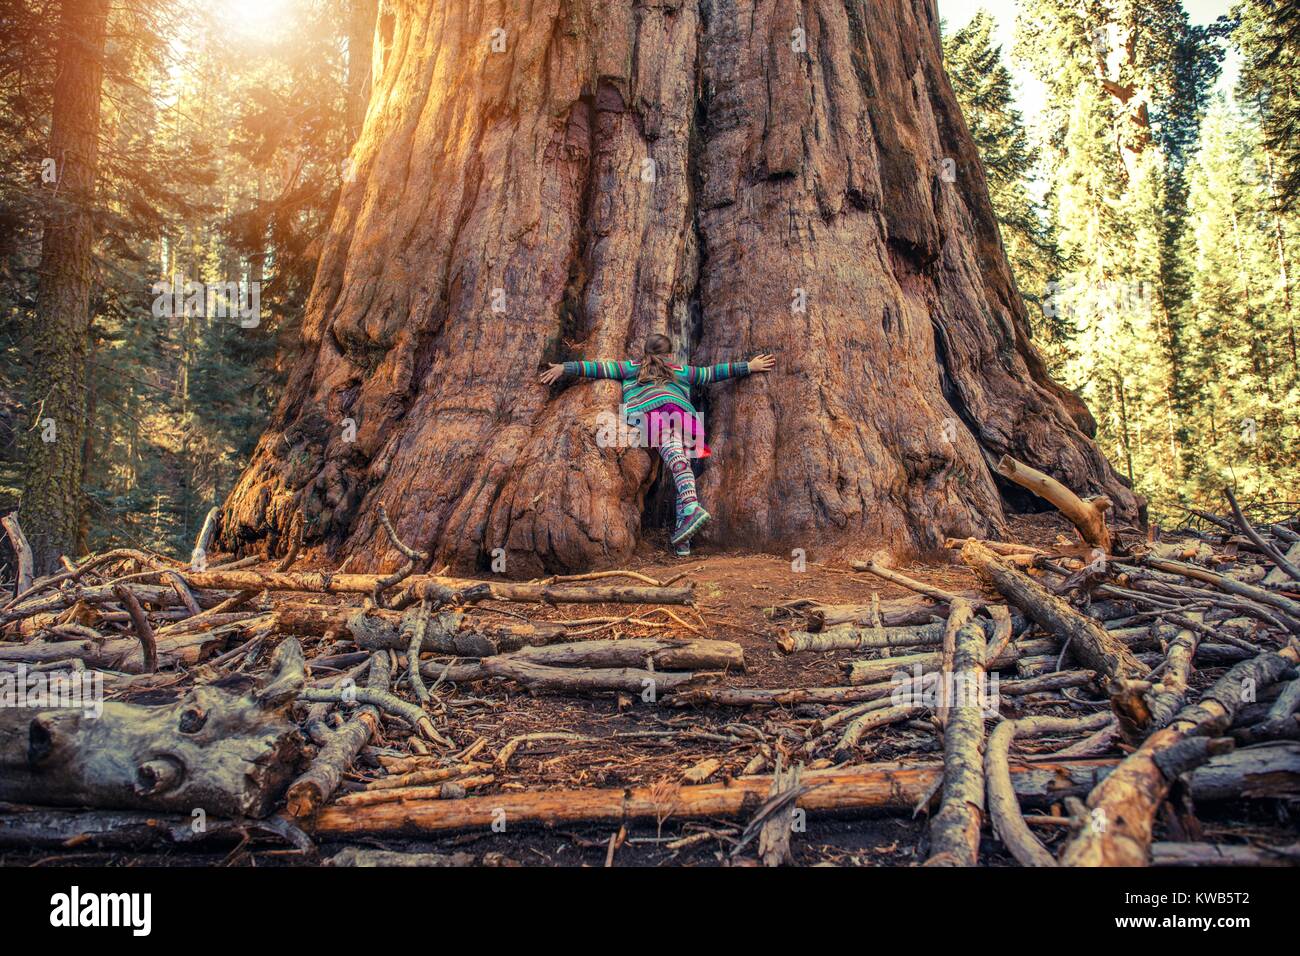 Hugging Giant Sequoia Redwood by Teenage Caucasian Girl. Exploring Giant Forest in California Sierra Nevada Mountains. Sequoia National Park. United S Stock Photo